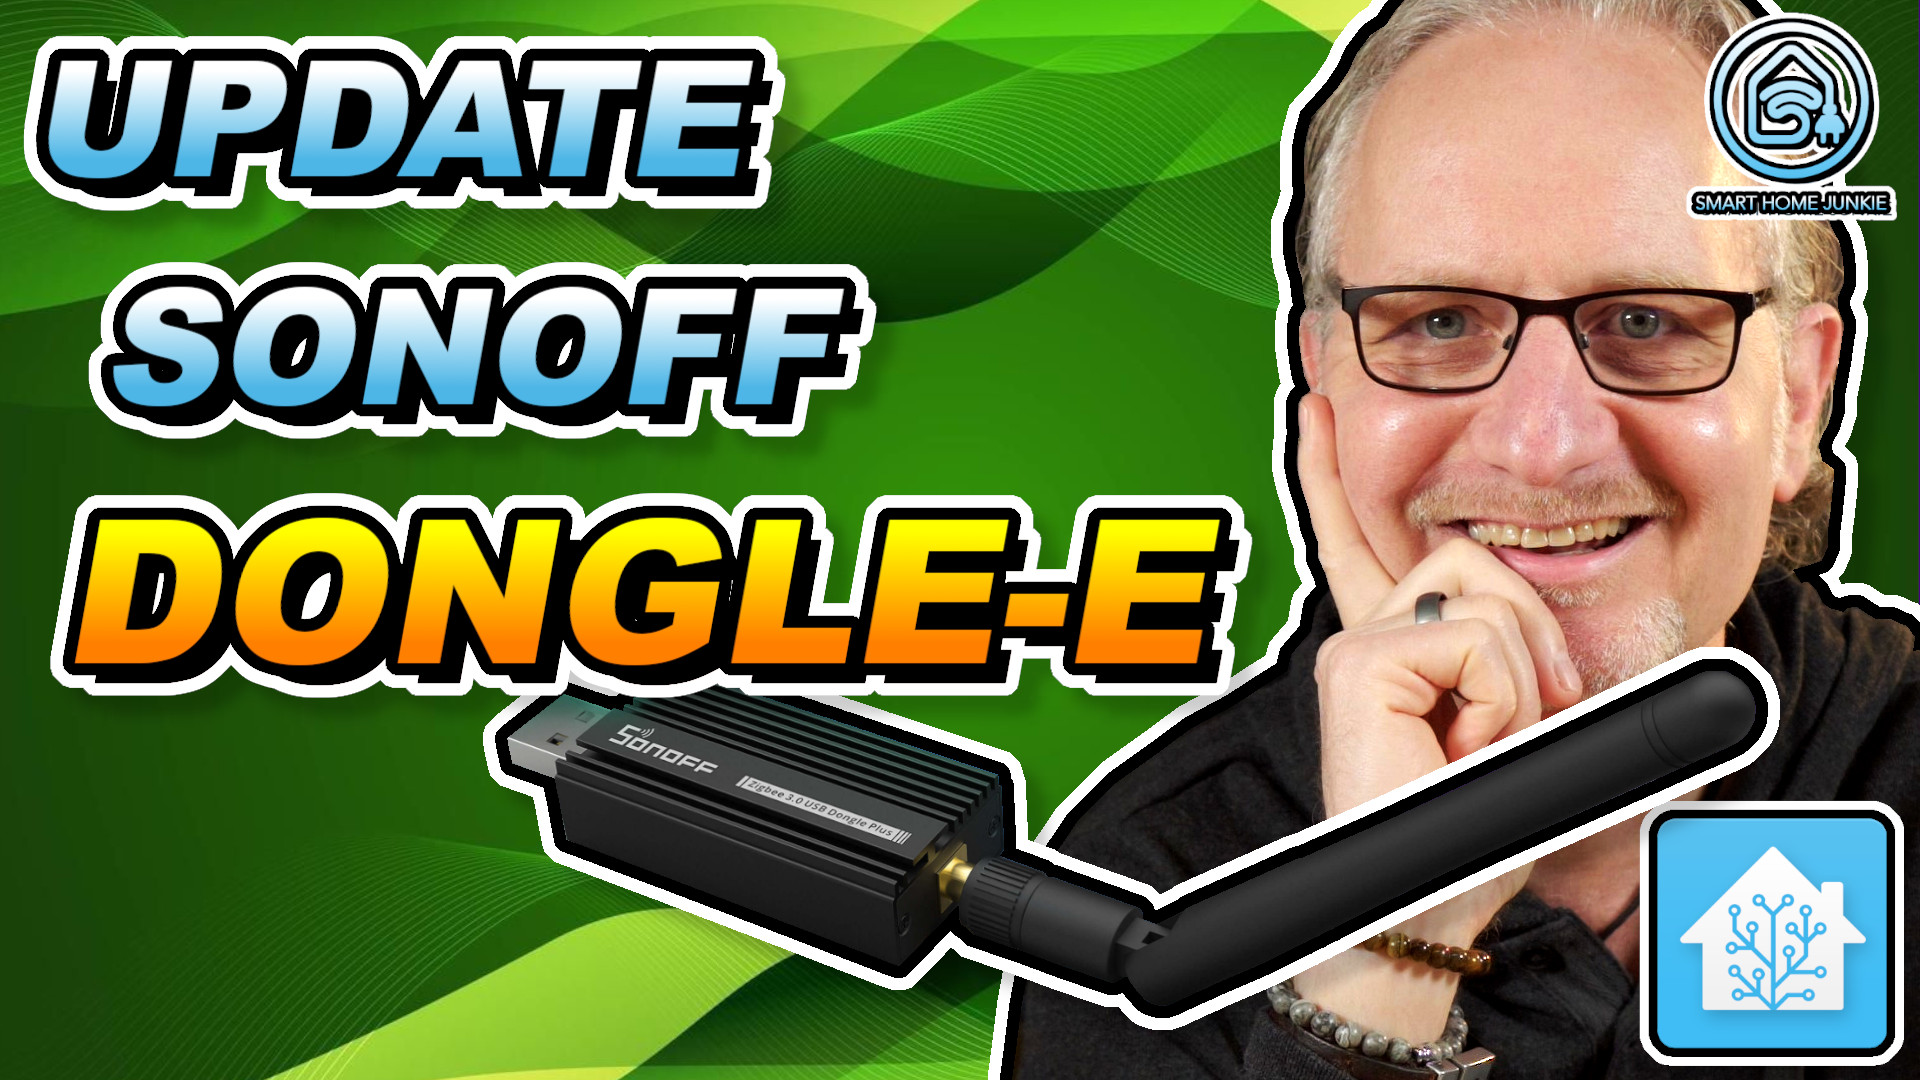 Update the Sonoff Zigbee Dongle-E Easily – How To